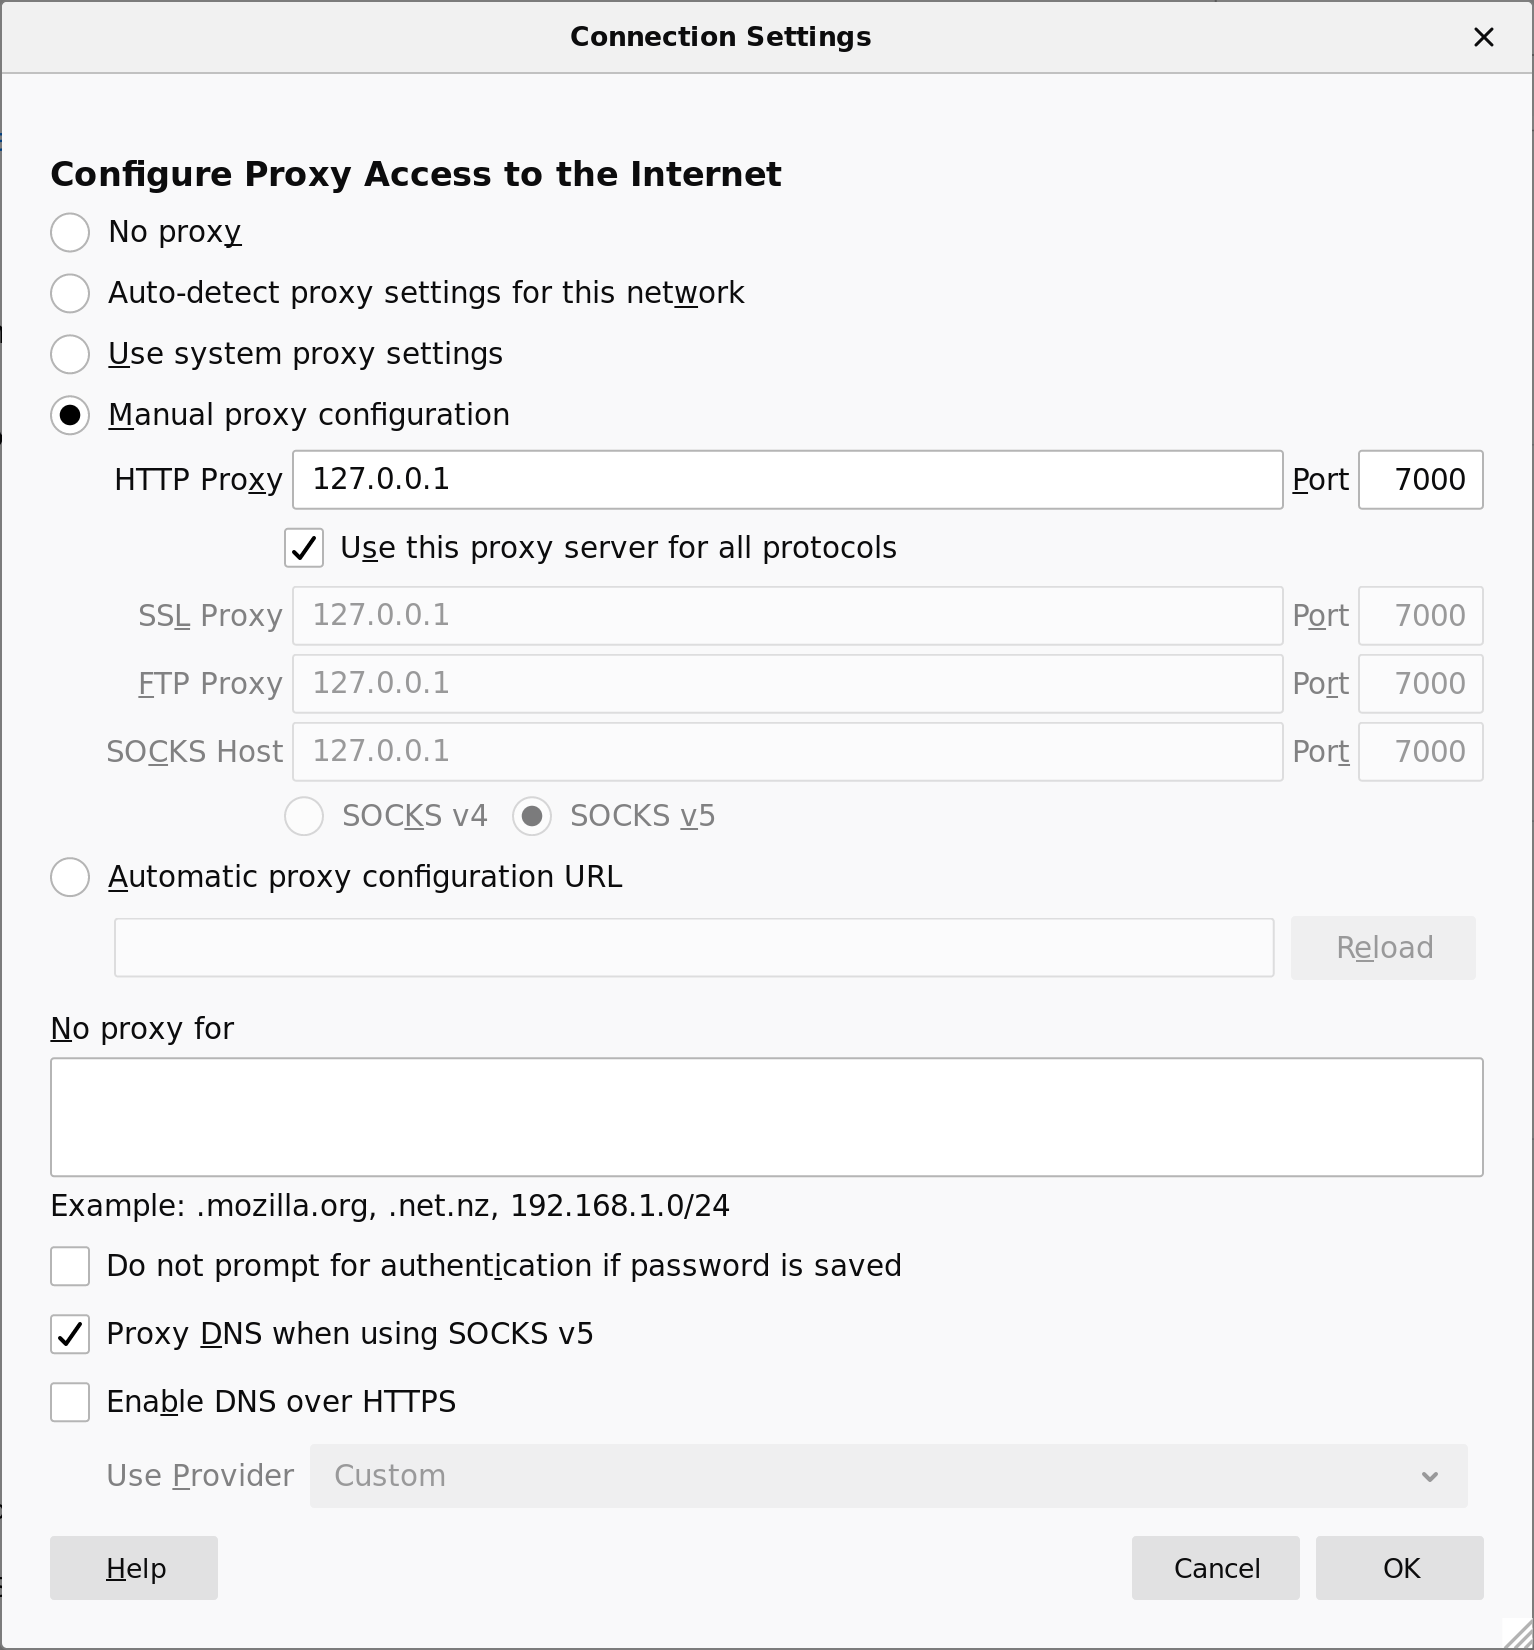 A screenshot of the Connection Settings dialog in Firefox 68.7.0esr.
      The "Manual proxy configuration" radio button is selected, with
      "HTTP Proxy: 127.0.0.1", "Port: 7000", and
      "Use this proxy server for all protocols" checked.